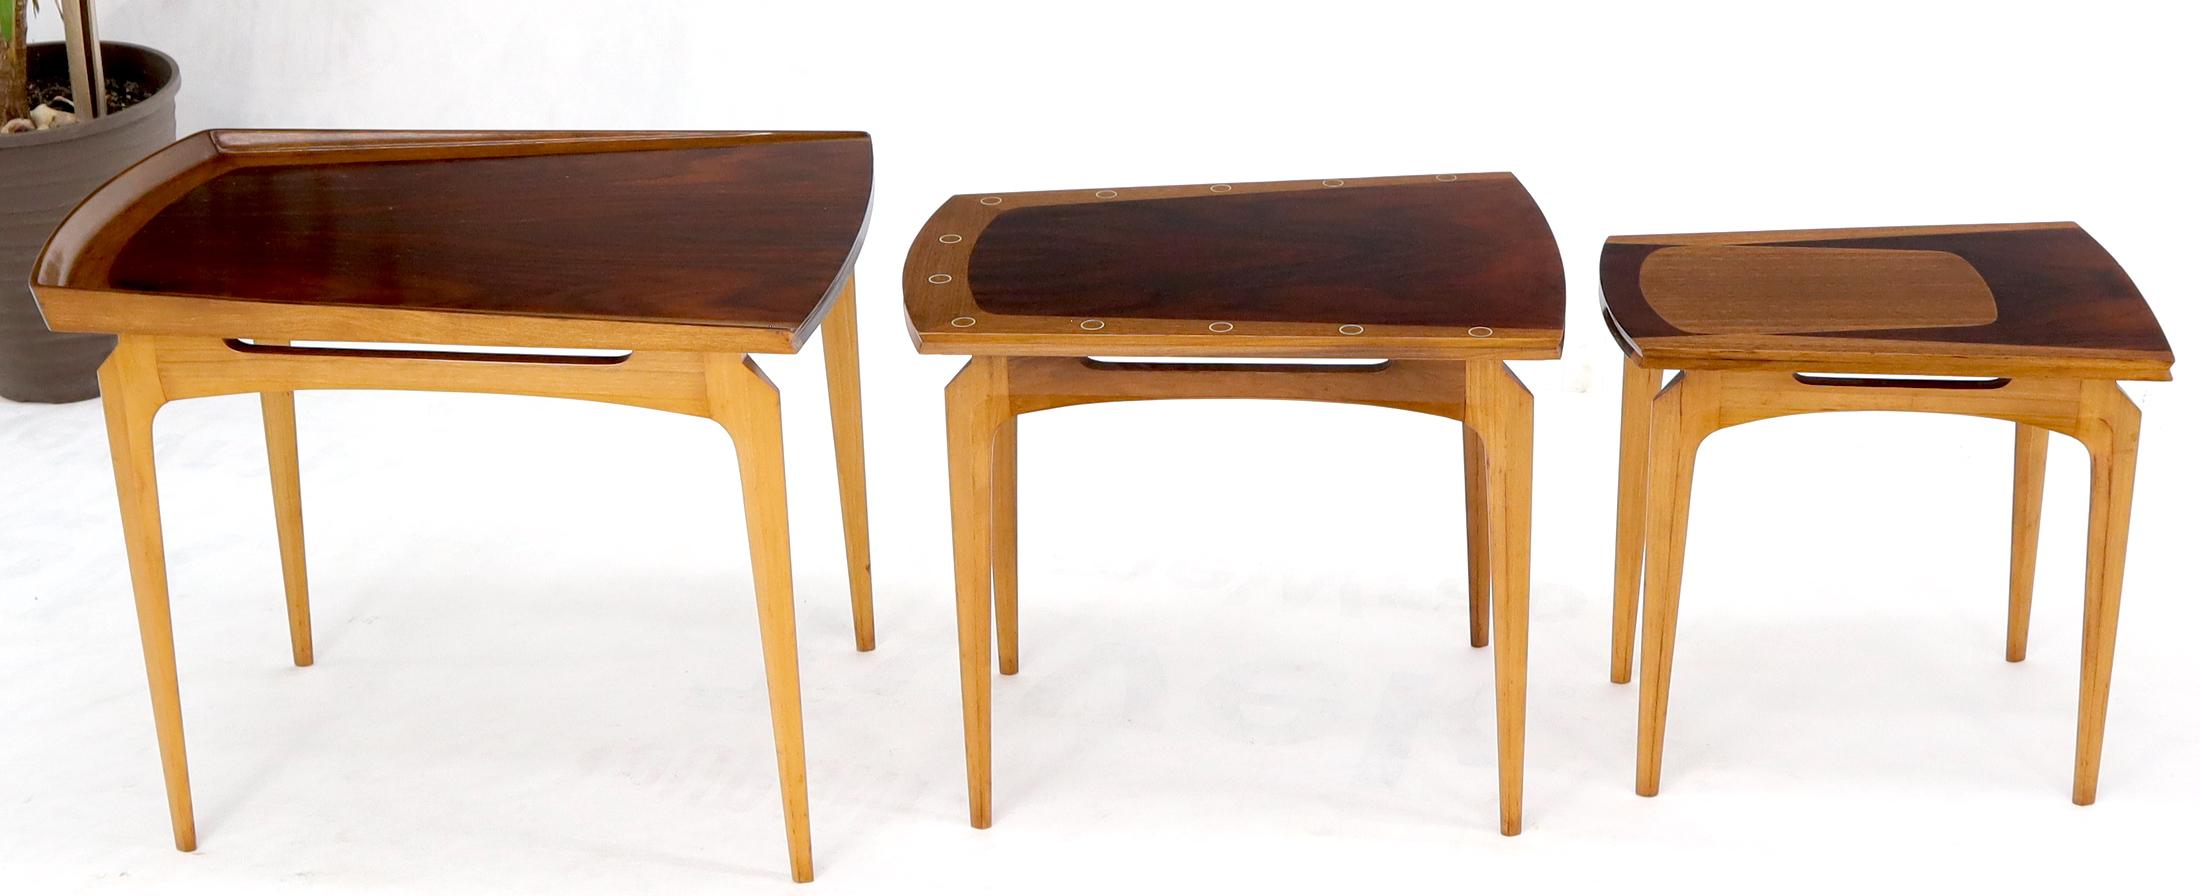 Rare Set of Three Nesting Table in Rosewood & Birch by Erno Fabry For Sale 1